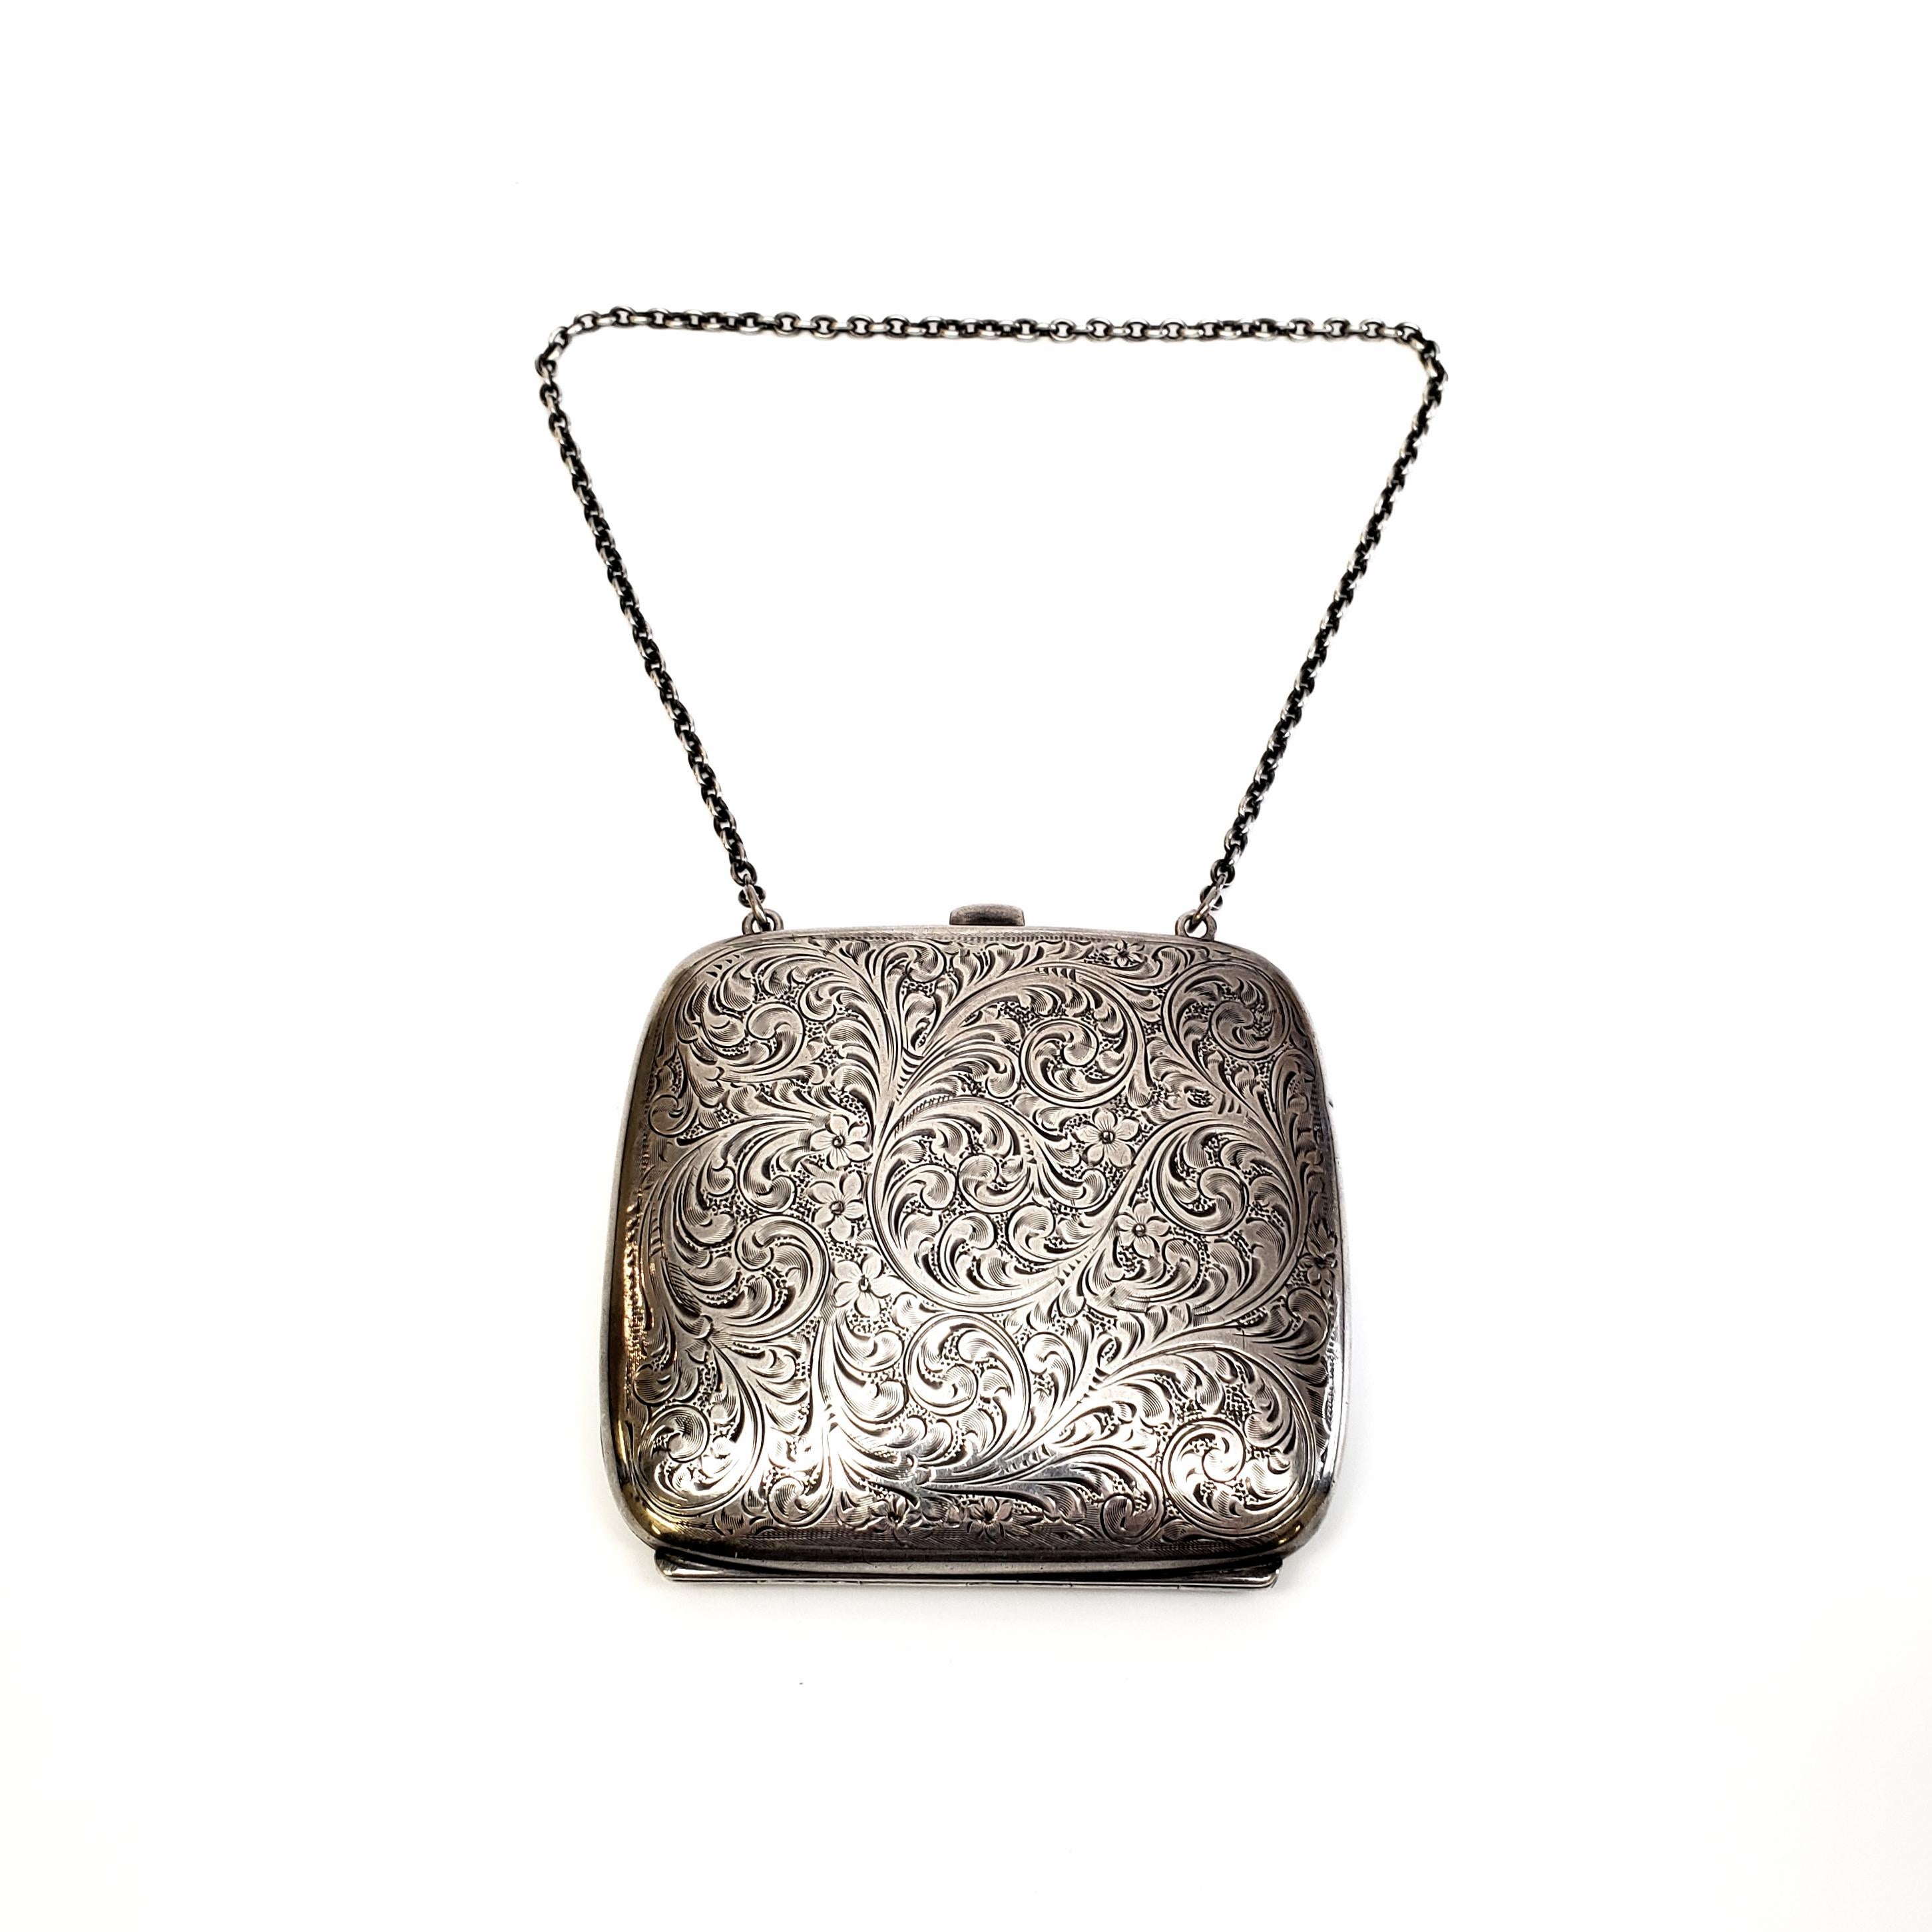 Vintage sterling silver coin purse by La Pierre Manufacturing Co.

Etched floral and flourish engraved design with monogram on one side. Round link chain strap and interior pockets on each side.

Monogram appears to be NBJ

Size: 3 1/2